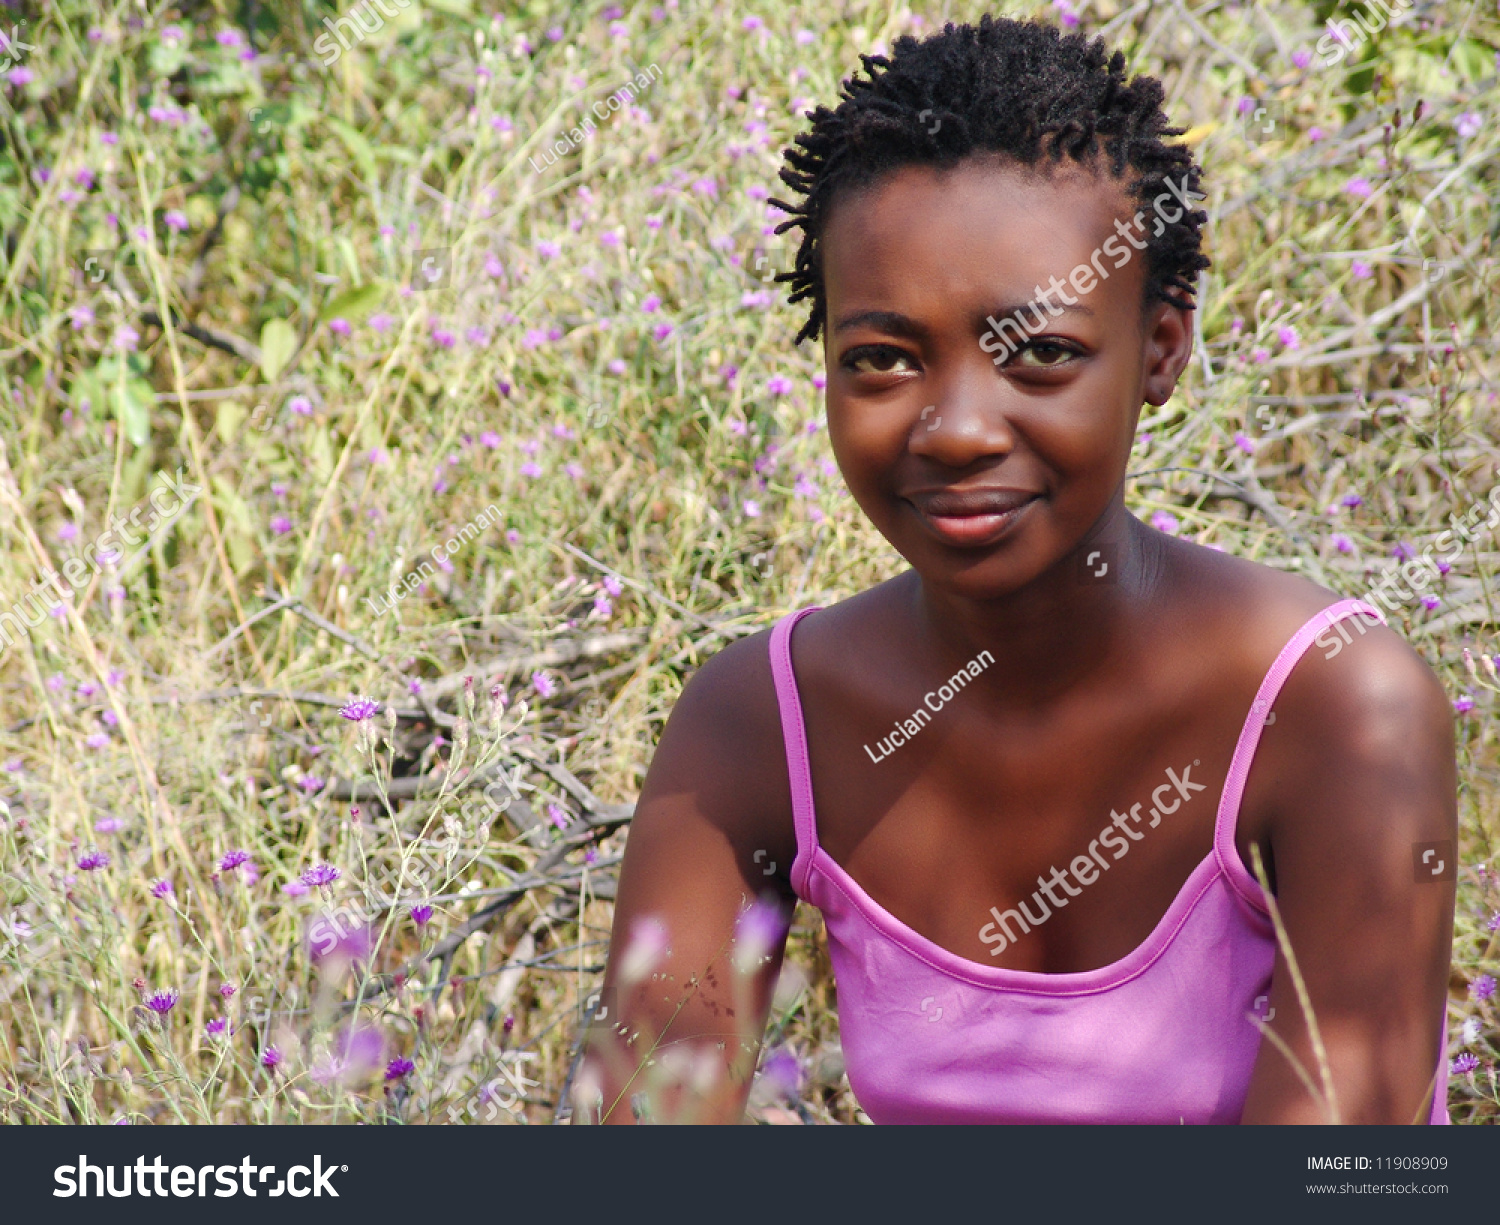 Picturs Of Nacked Black Girls Excelent Porn